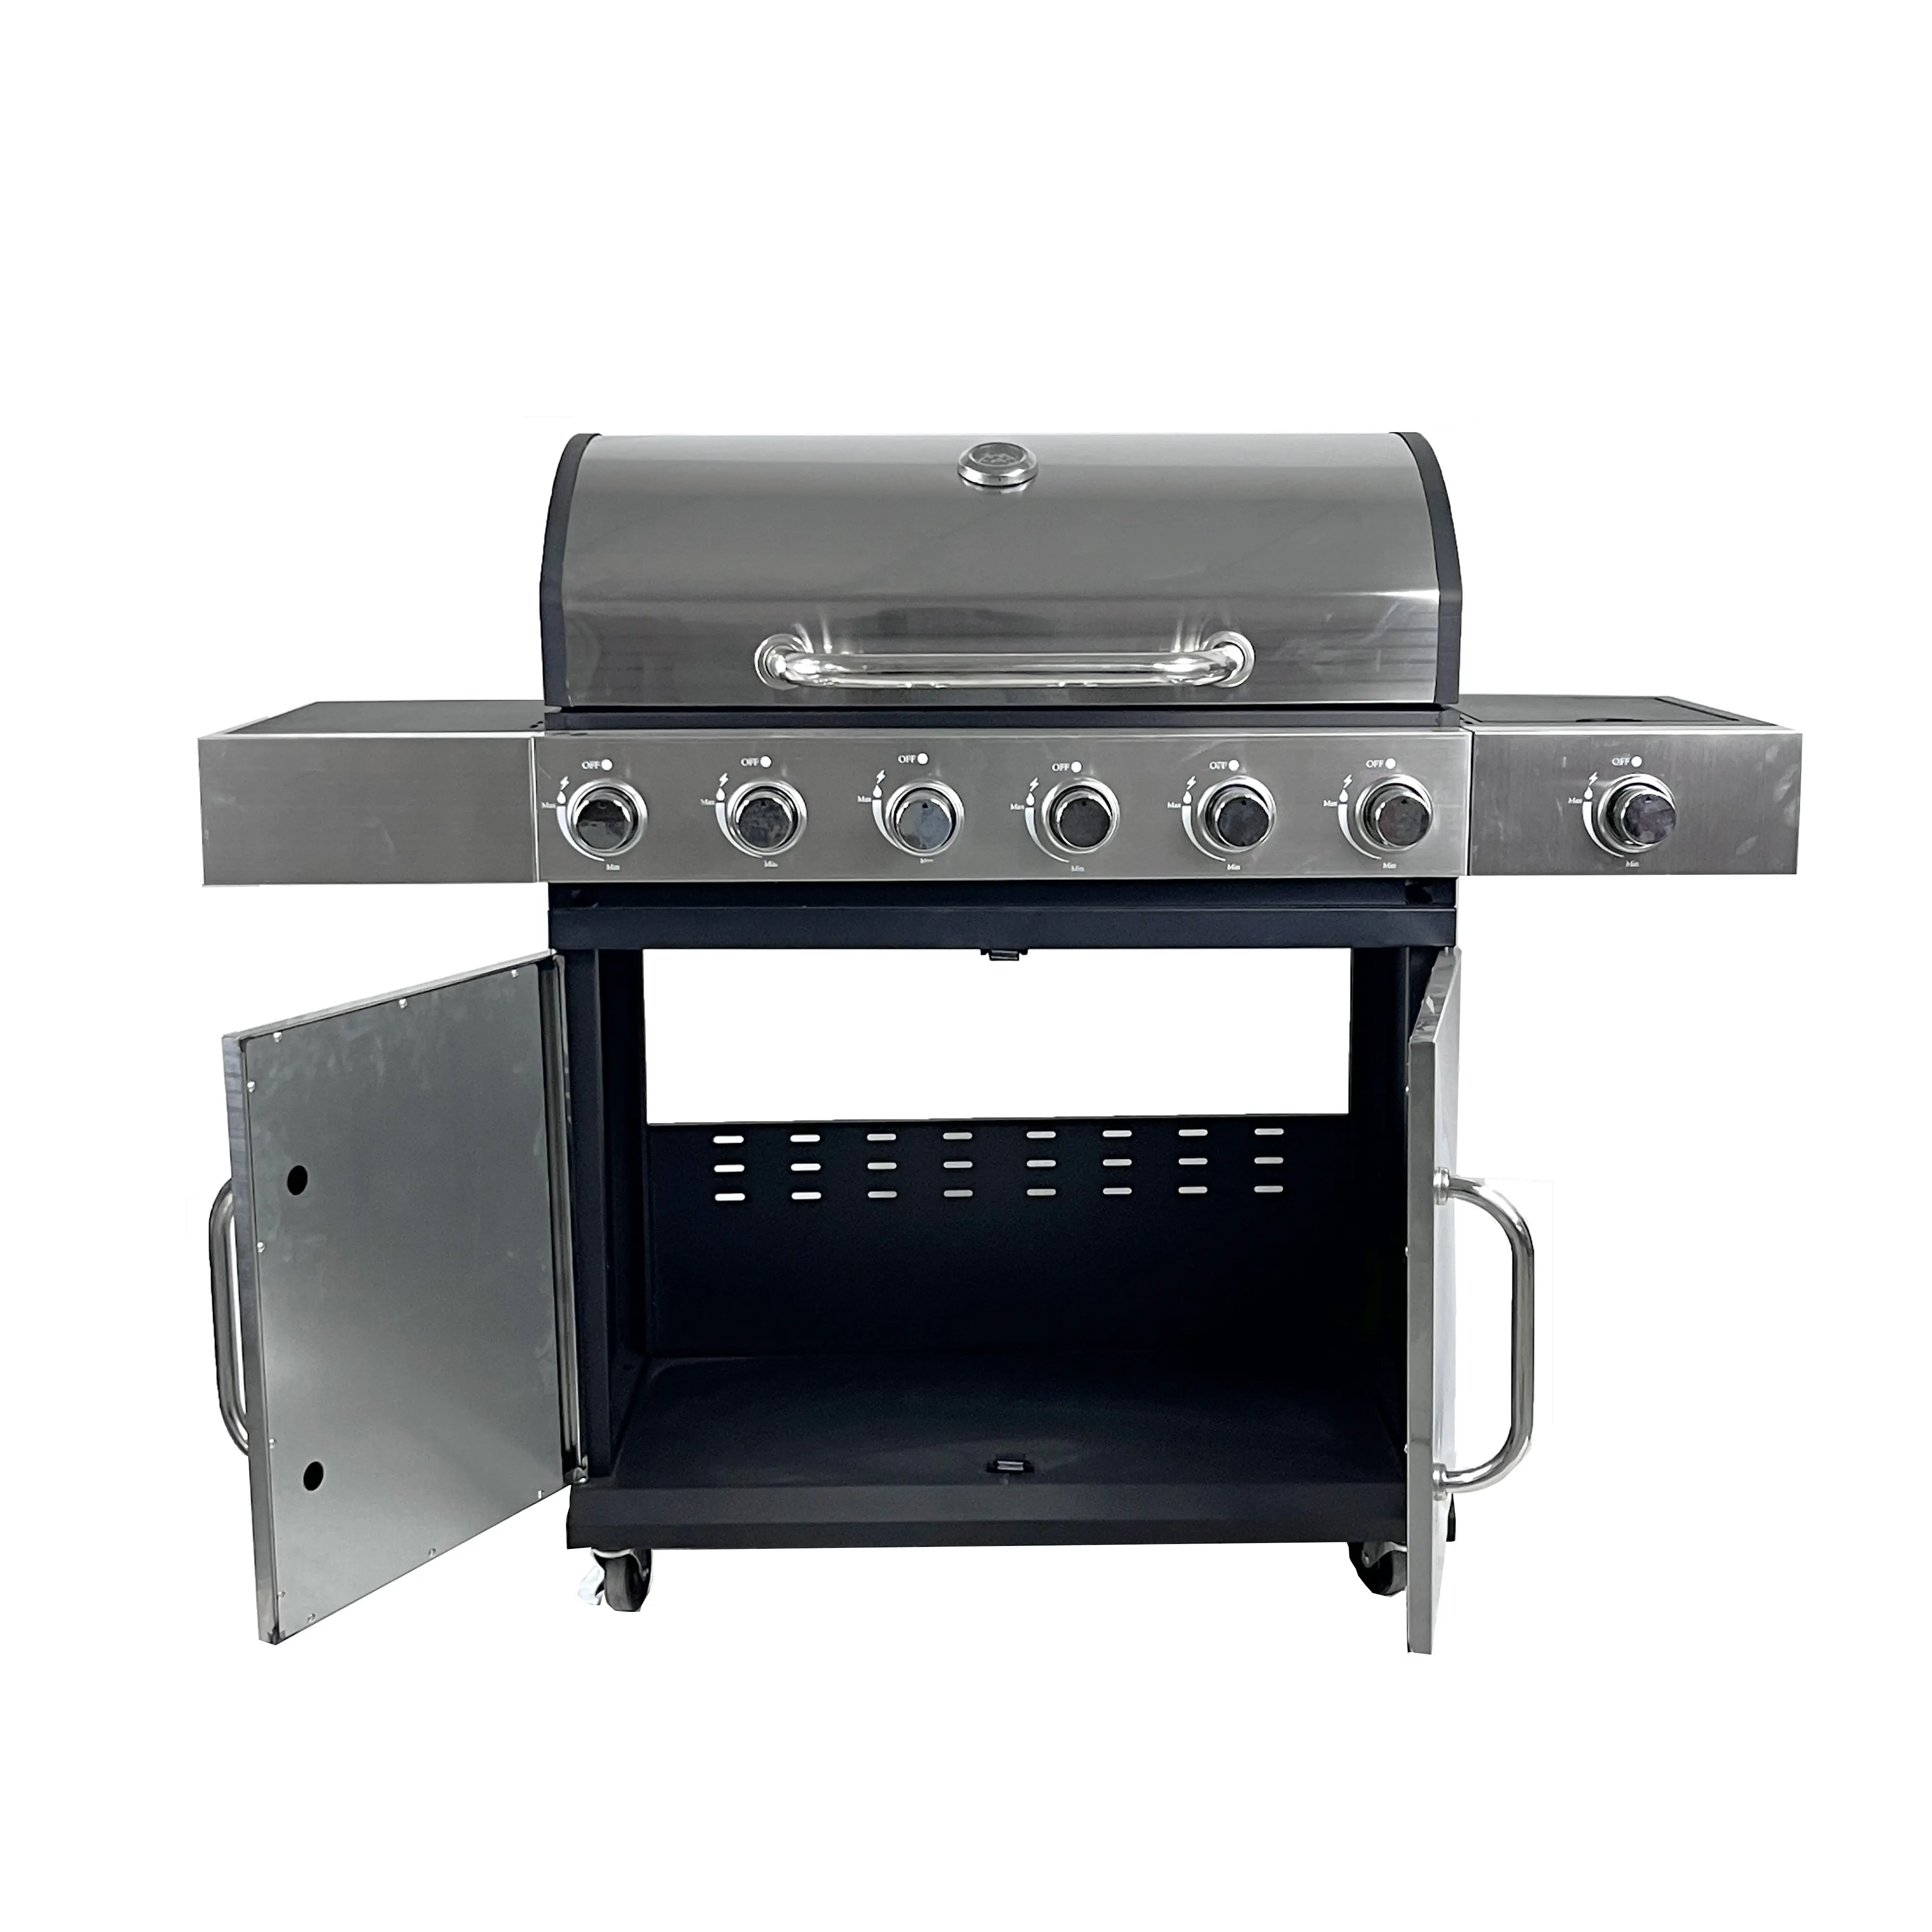 Outdoor Bbq Gas Grill 6 Branders Barbeque Propaan Gas Grill Met Zijbrander Voor Outdoor Party